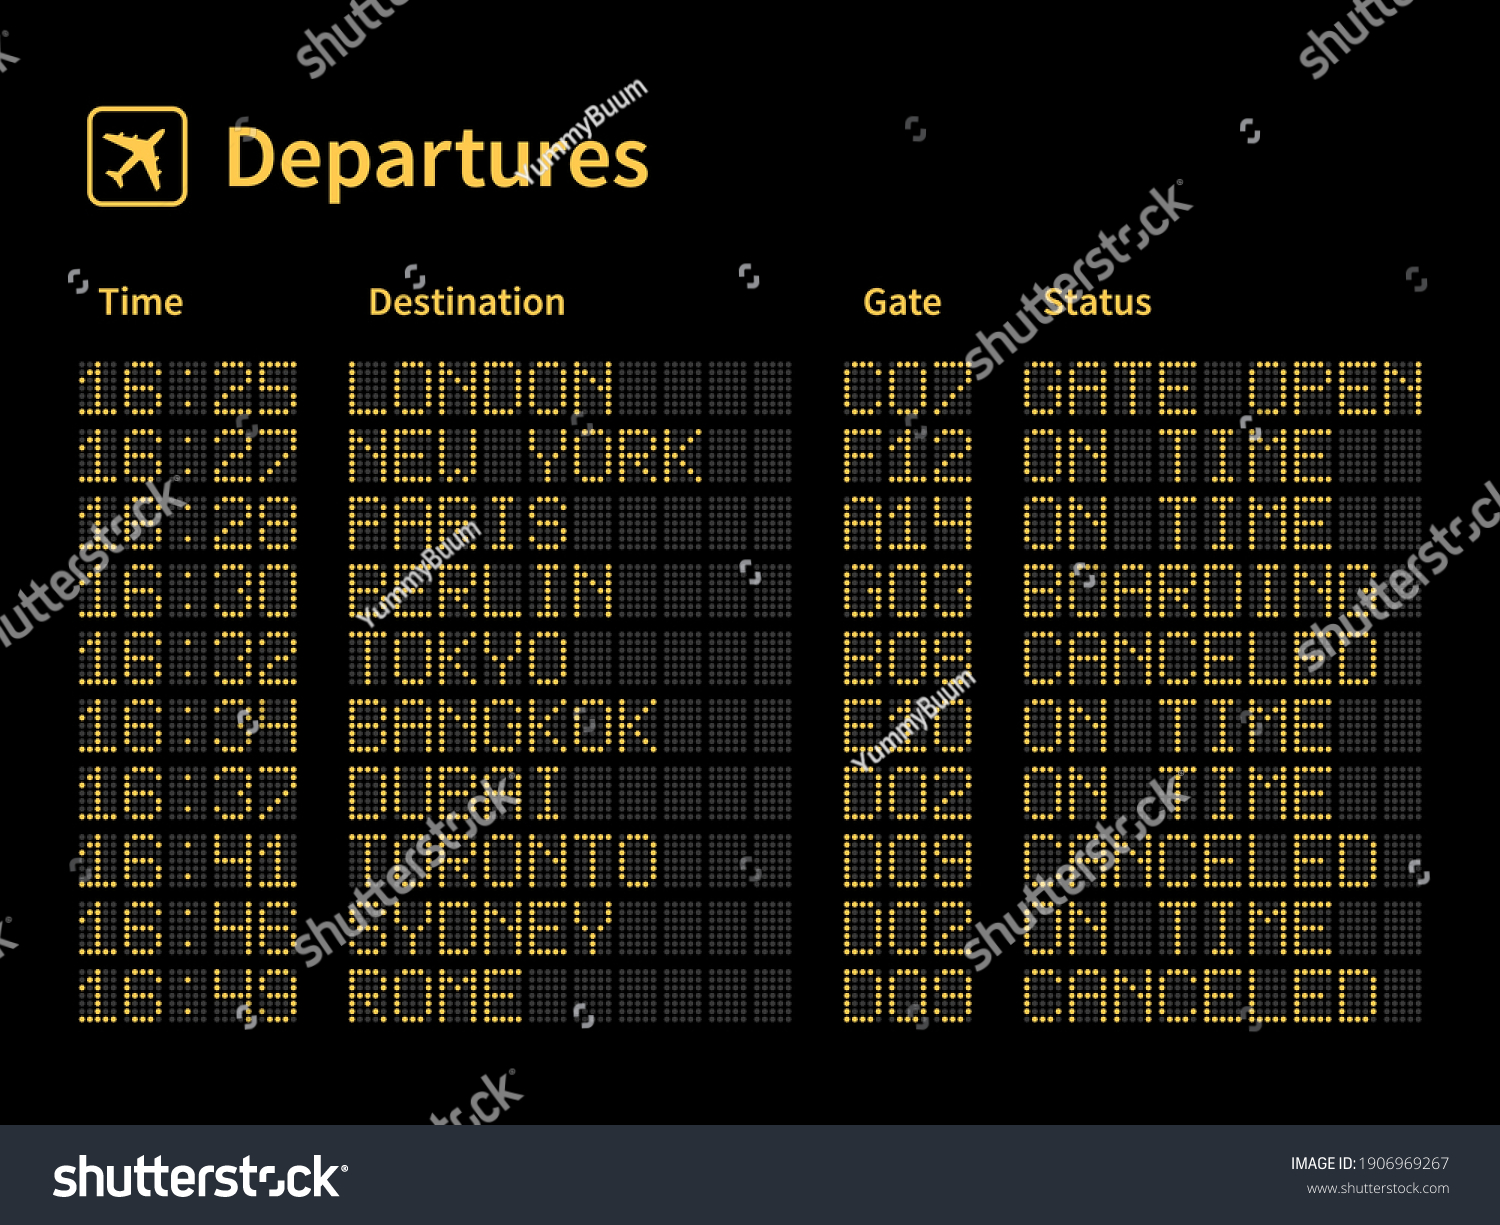 SVG of Airport led board. Aircrafts departures and terminal number gate timetable information, light yellow dot letters and numbers on black panel. Flight schedule on dashboard boarding status vector concept svg